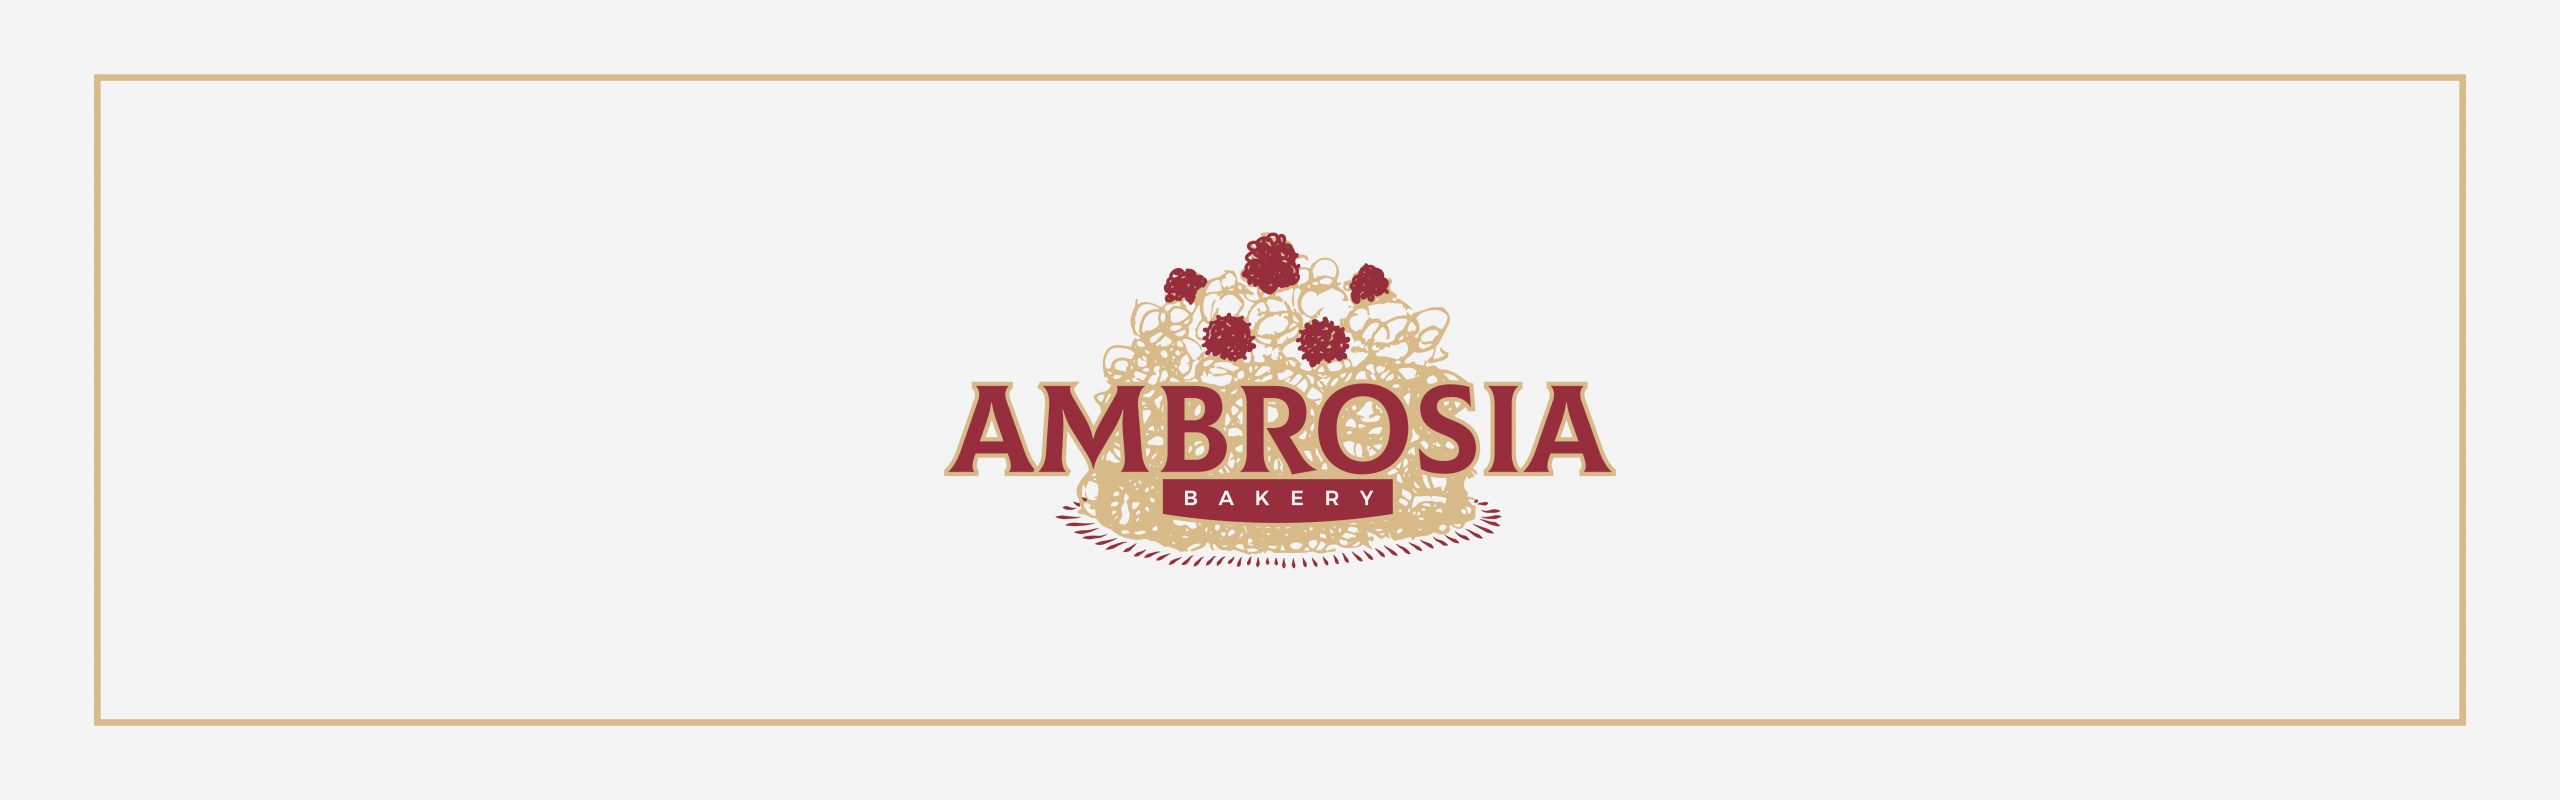 The image displays the logo for "Ambrosia Bakery," featuring stylized text and decorative elements that include what appear to be grapes or berries and leaves. The logo has a classical or vintage appearance.